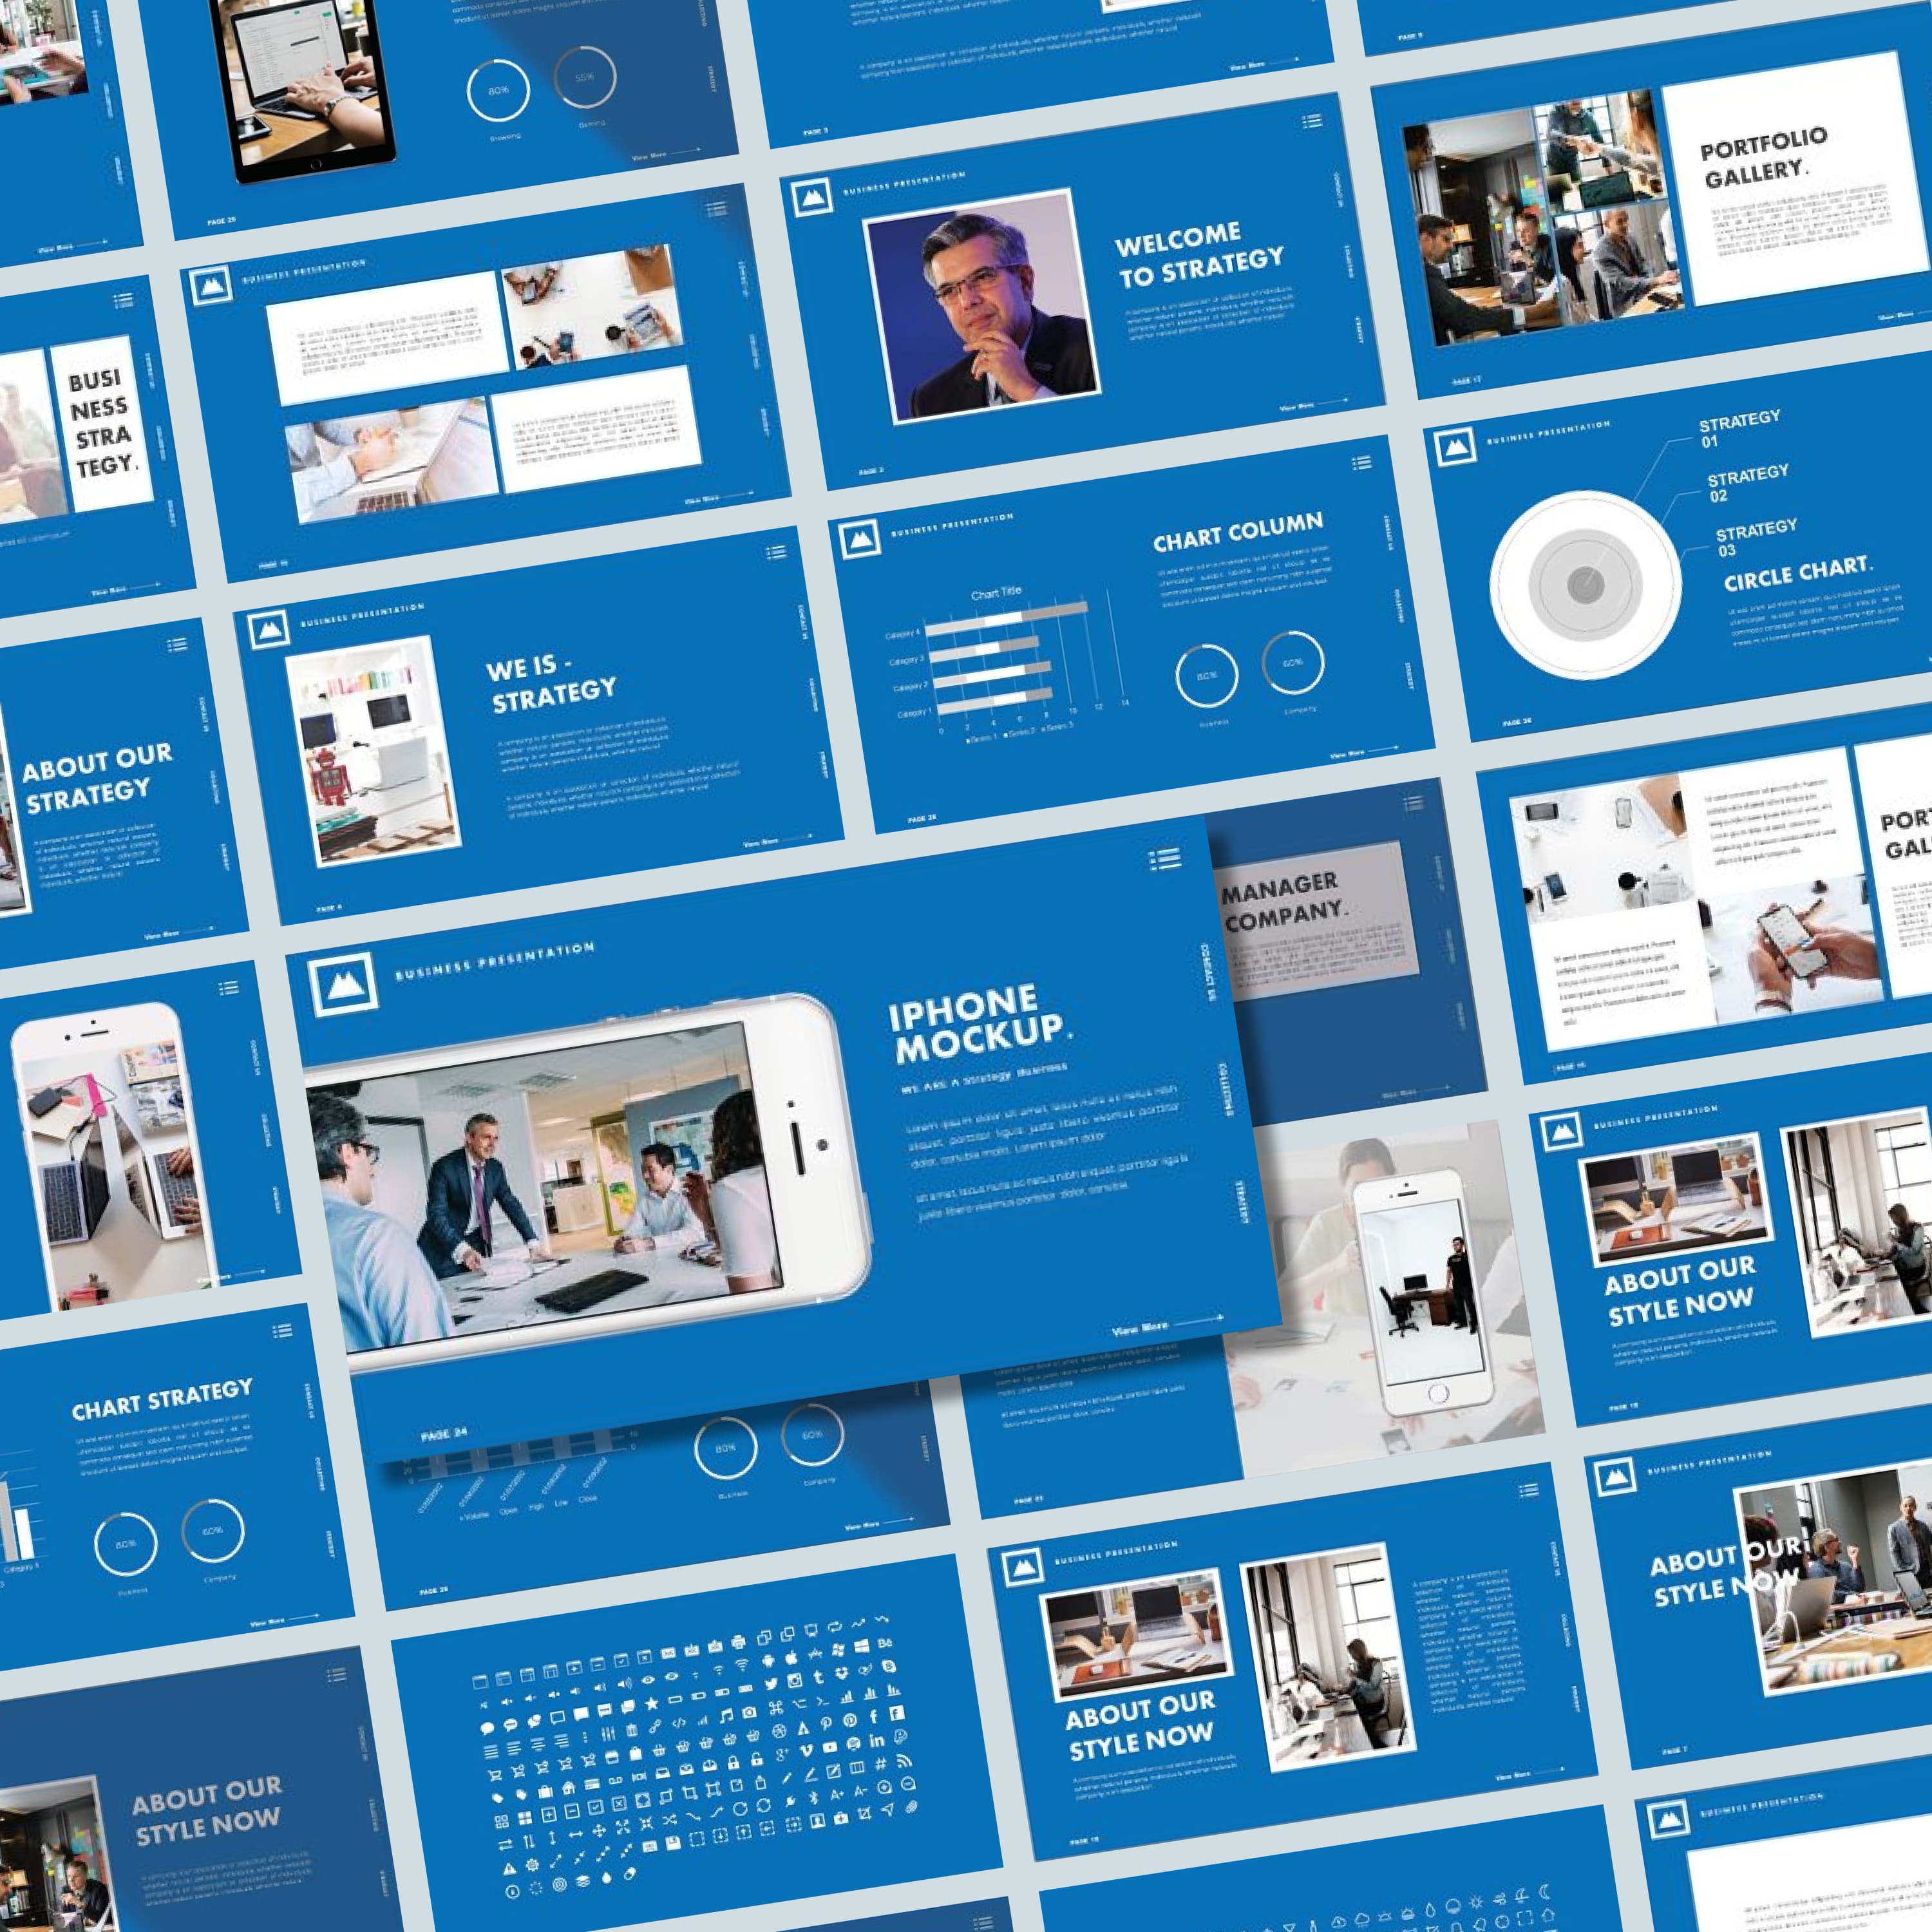 STRATEGY - Powerpoint Template created by Barland Design.